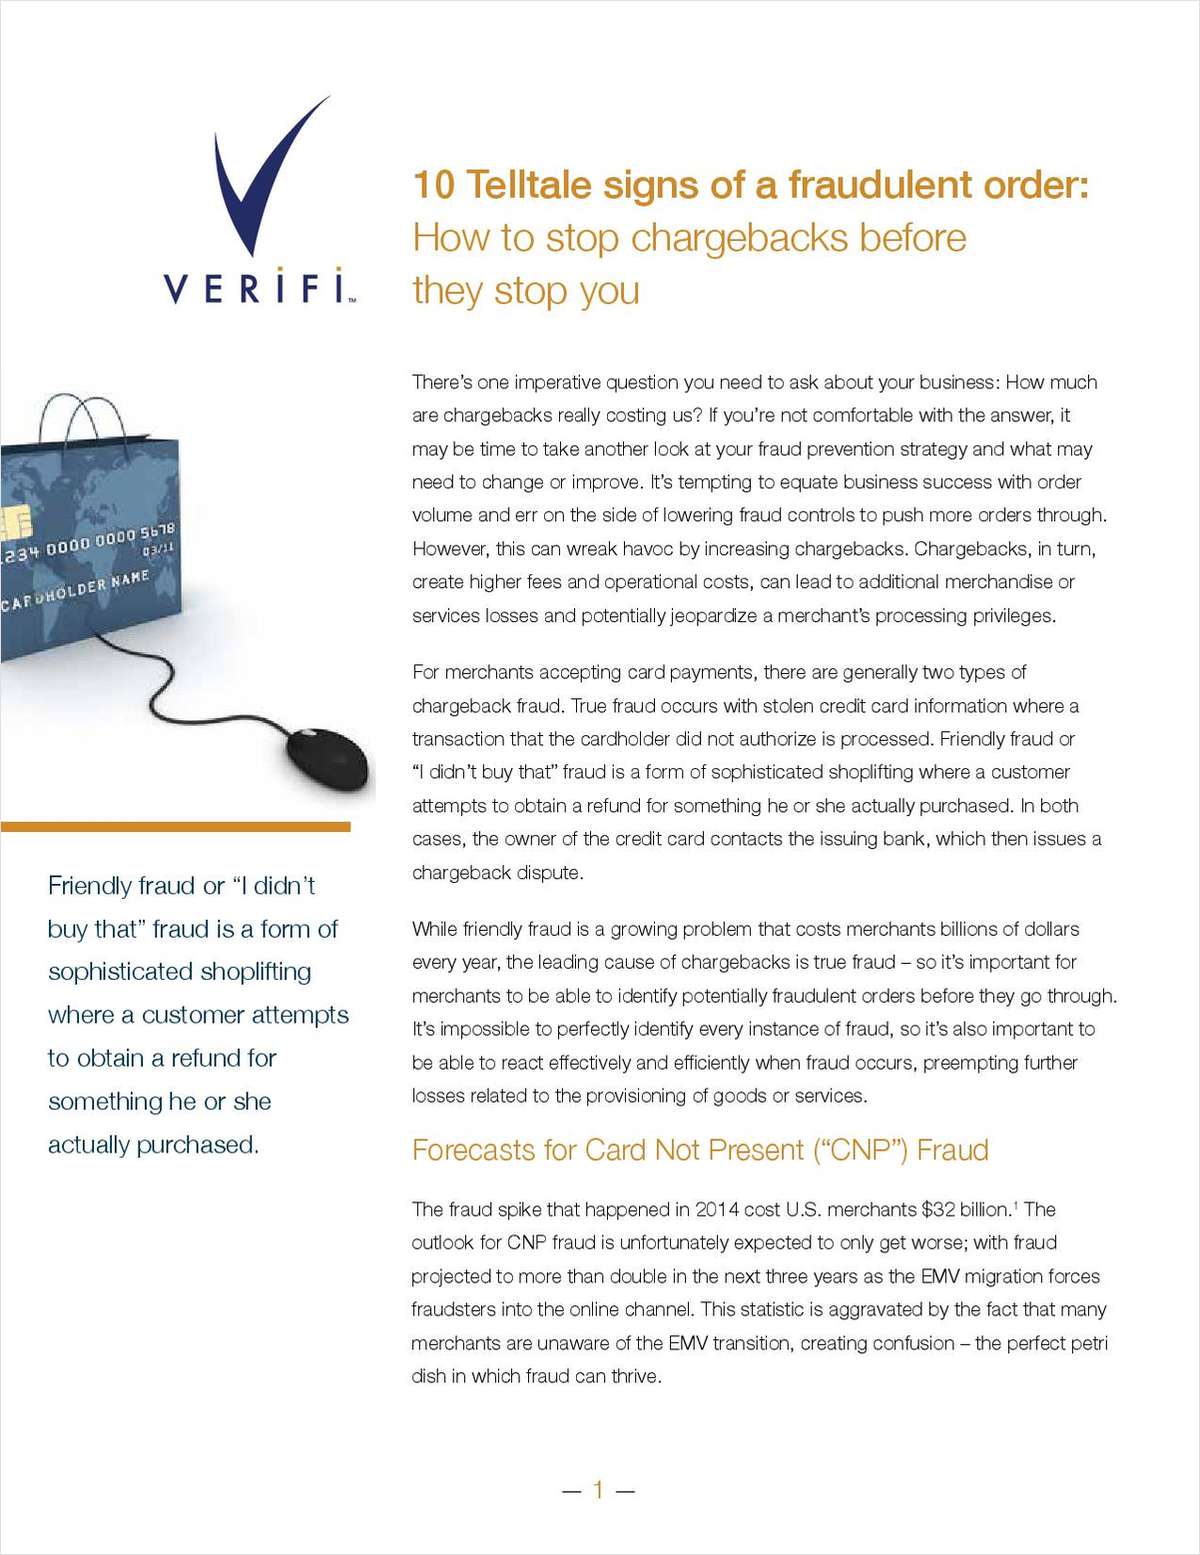 10 Telltale Signs of a Fraudulent Order: How to stop chargebacks before they stop you